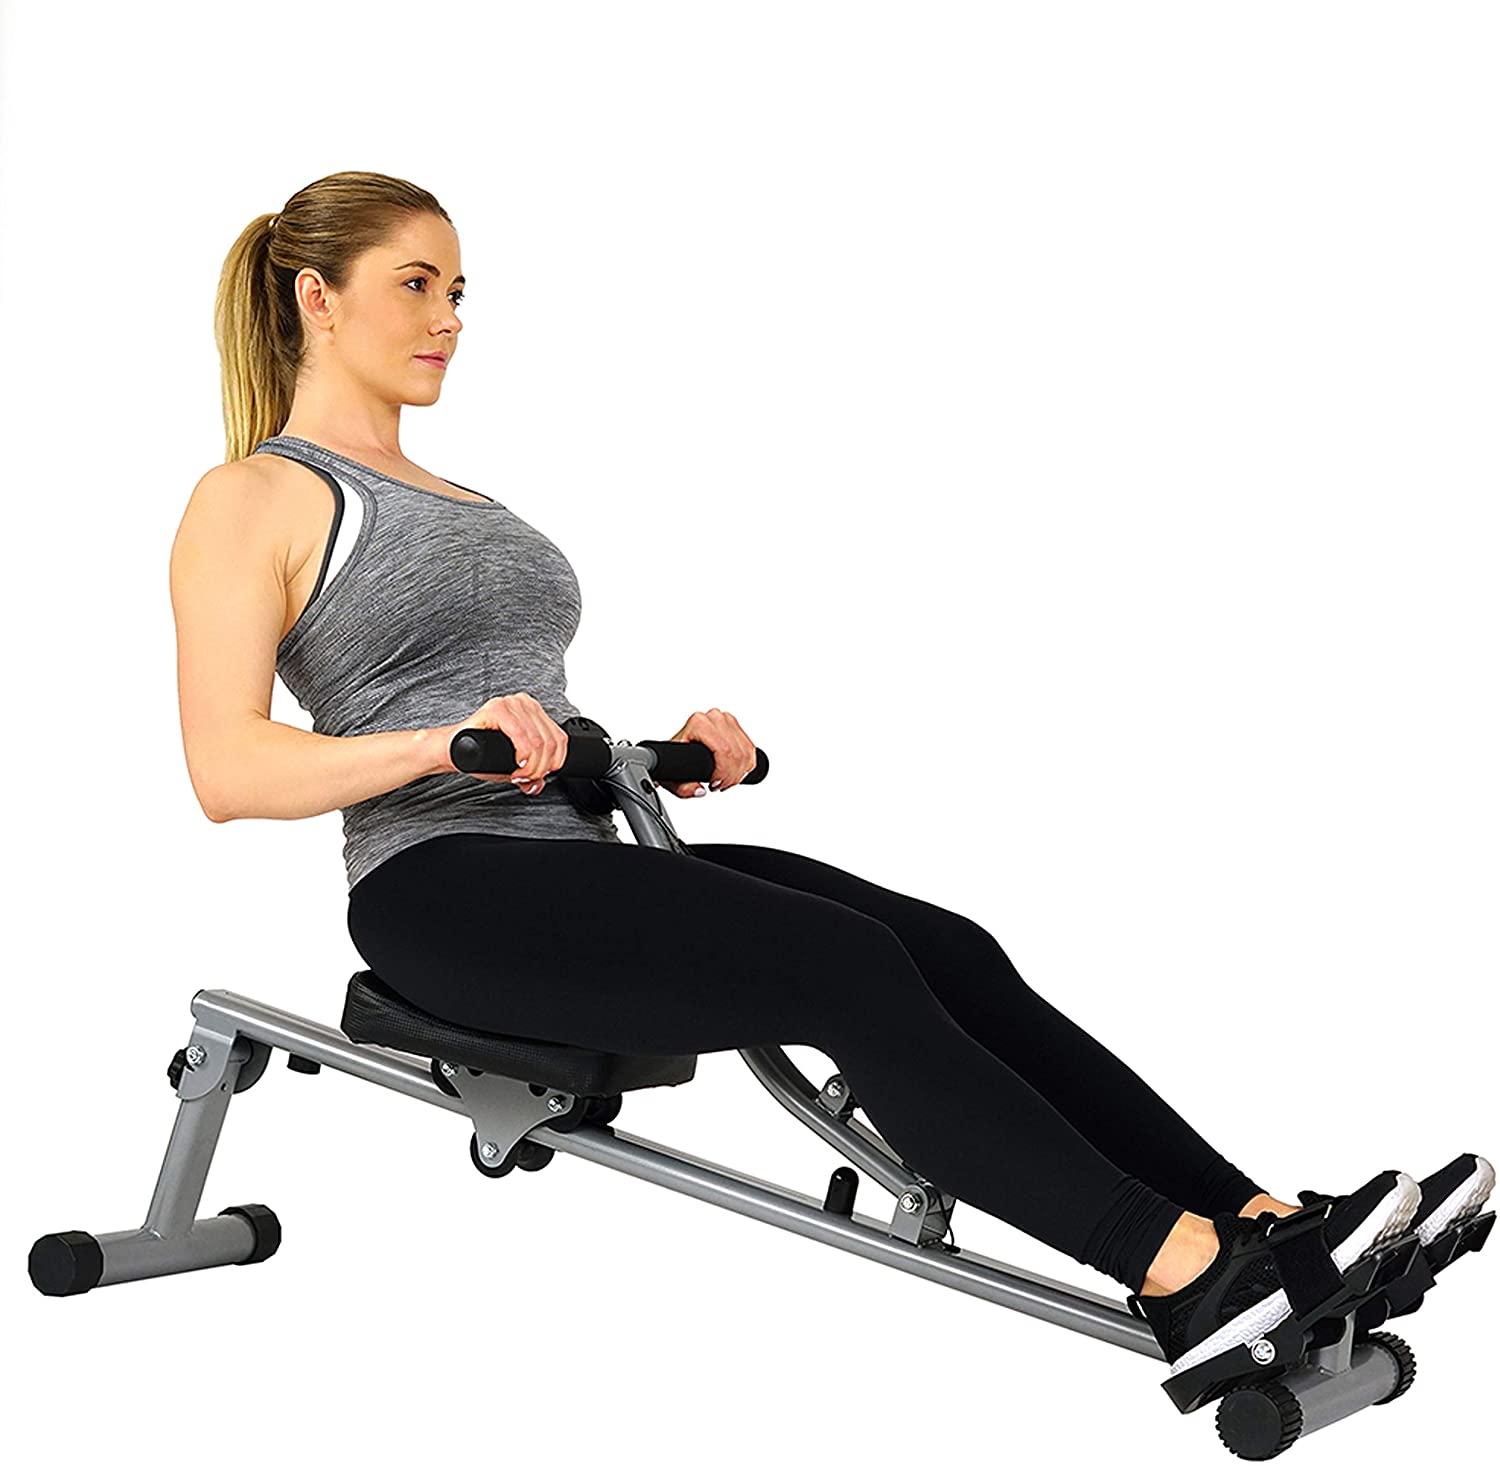 10 best rowing machines for whole body home exercise 2021 herstylecode 7 10 Best Rowing Machines for Whole Body Home Exercise 2023